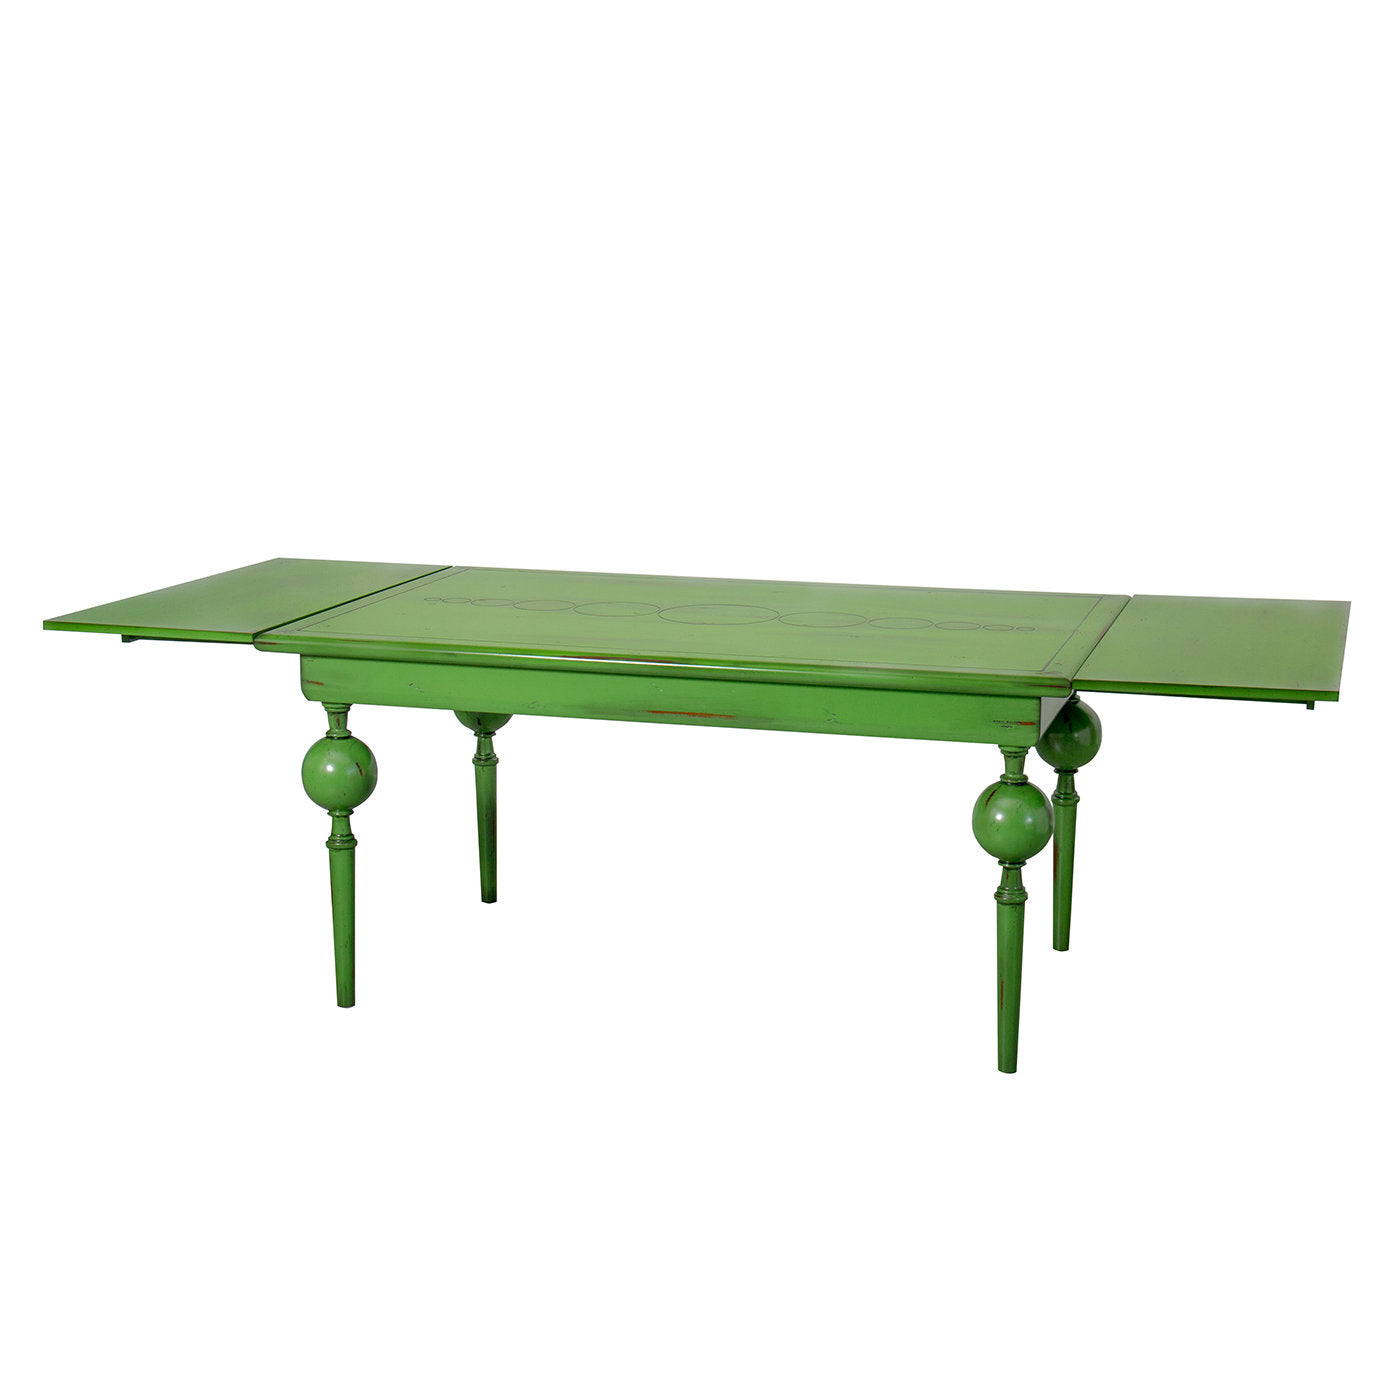 Le Bolle Extendable Table - Alternative view 1